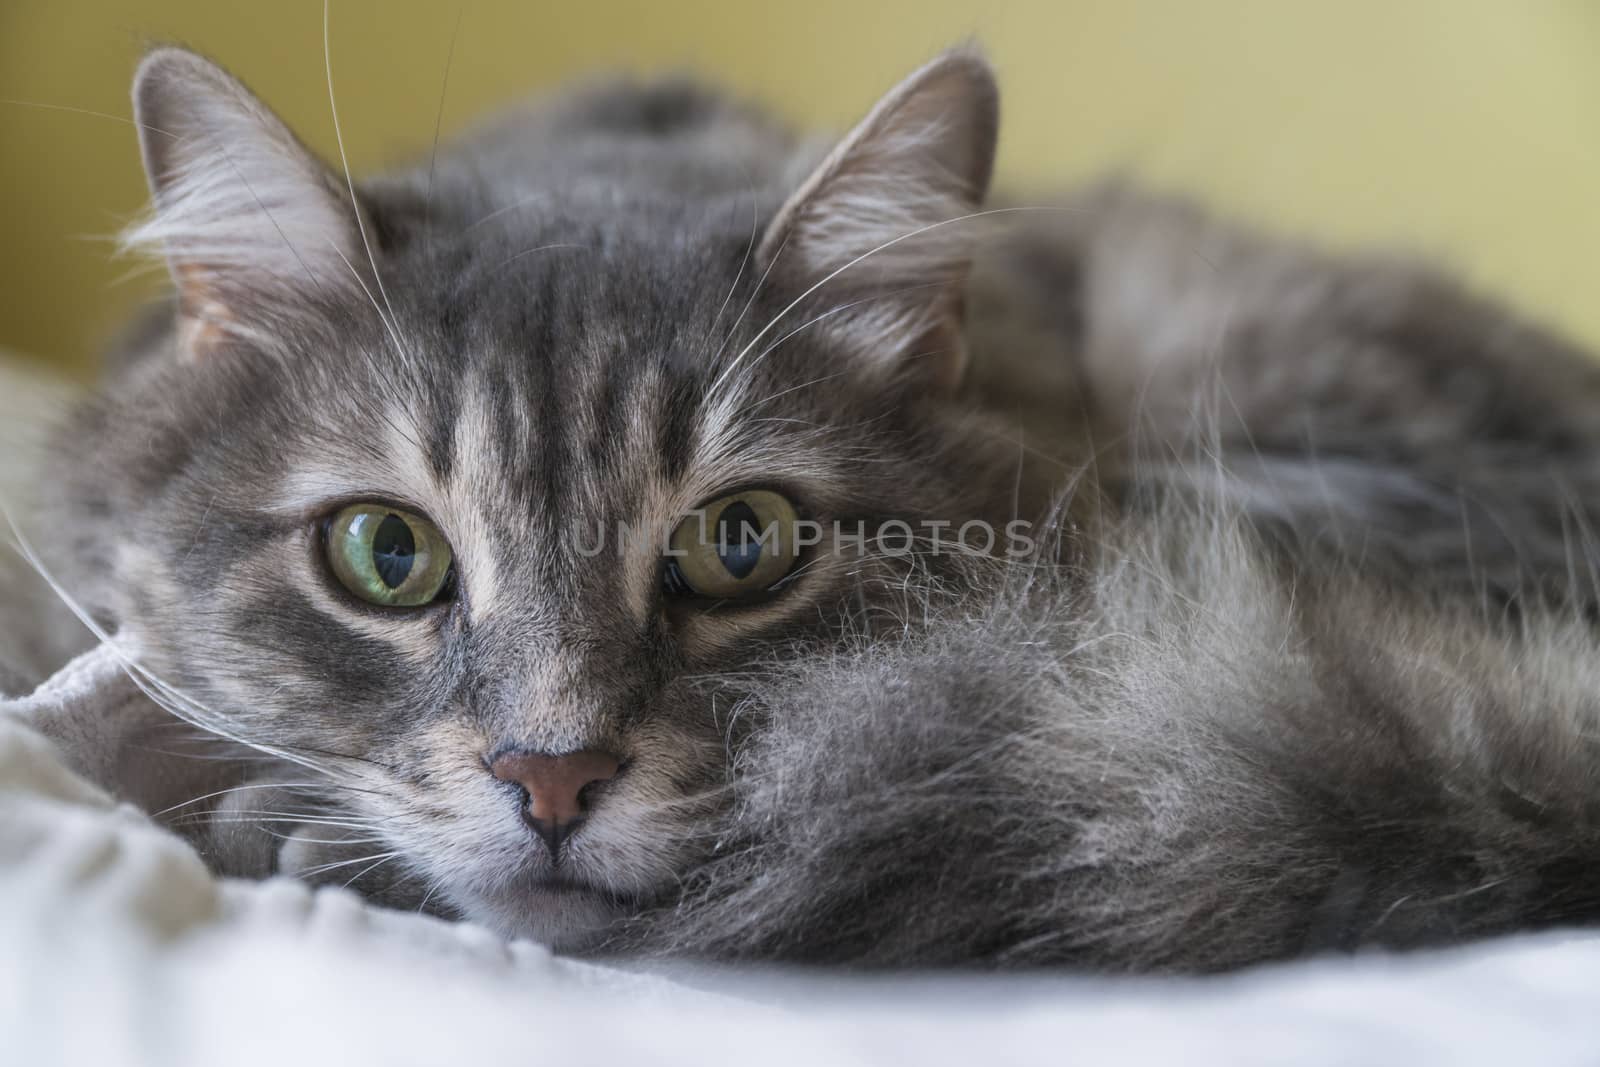 closeup of a cute tabby cat lying on bed at home